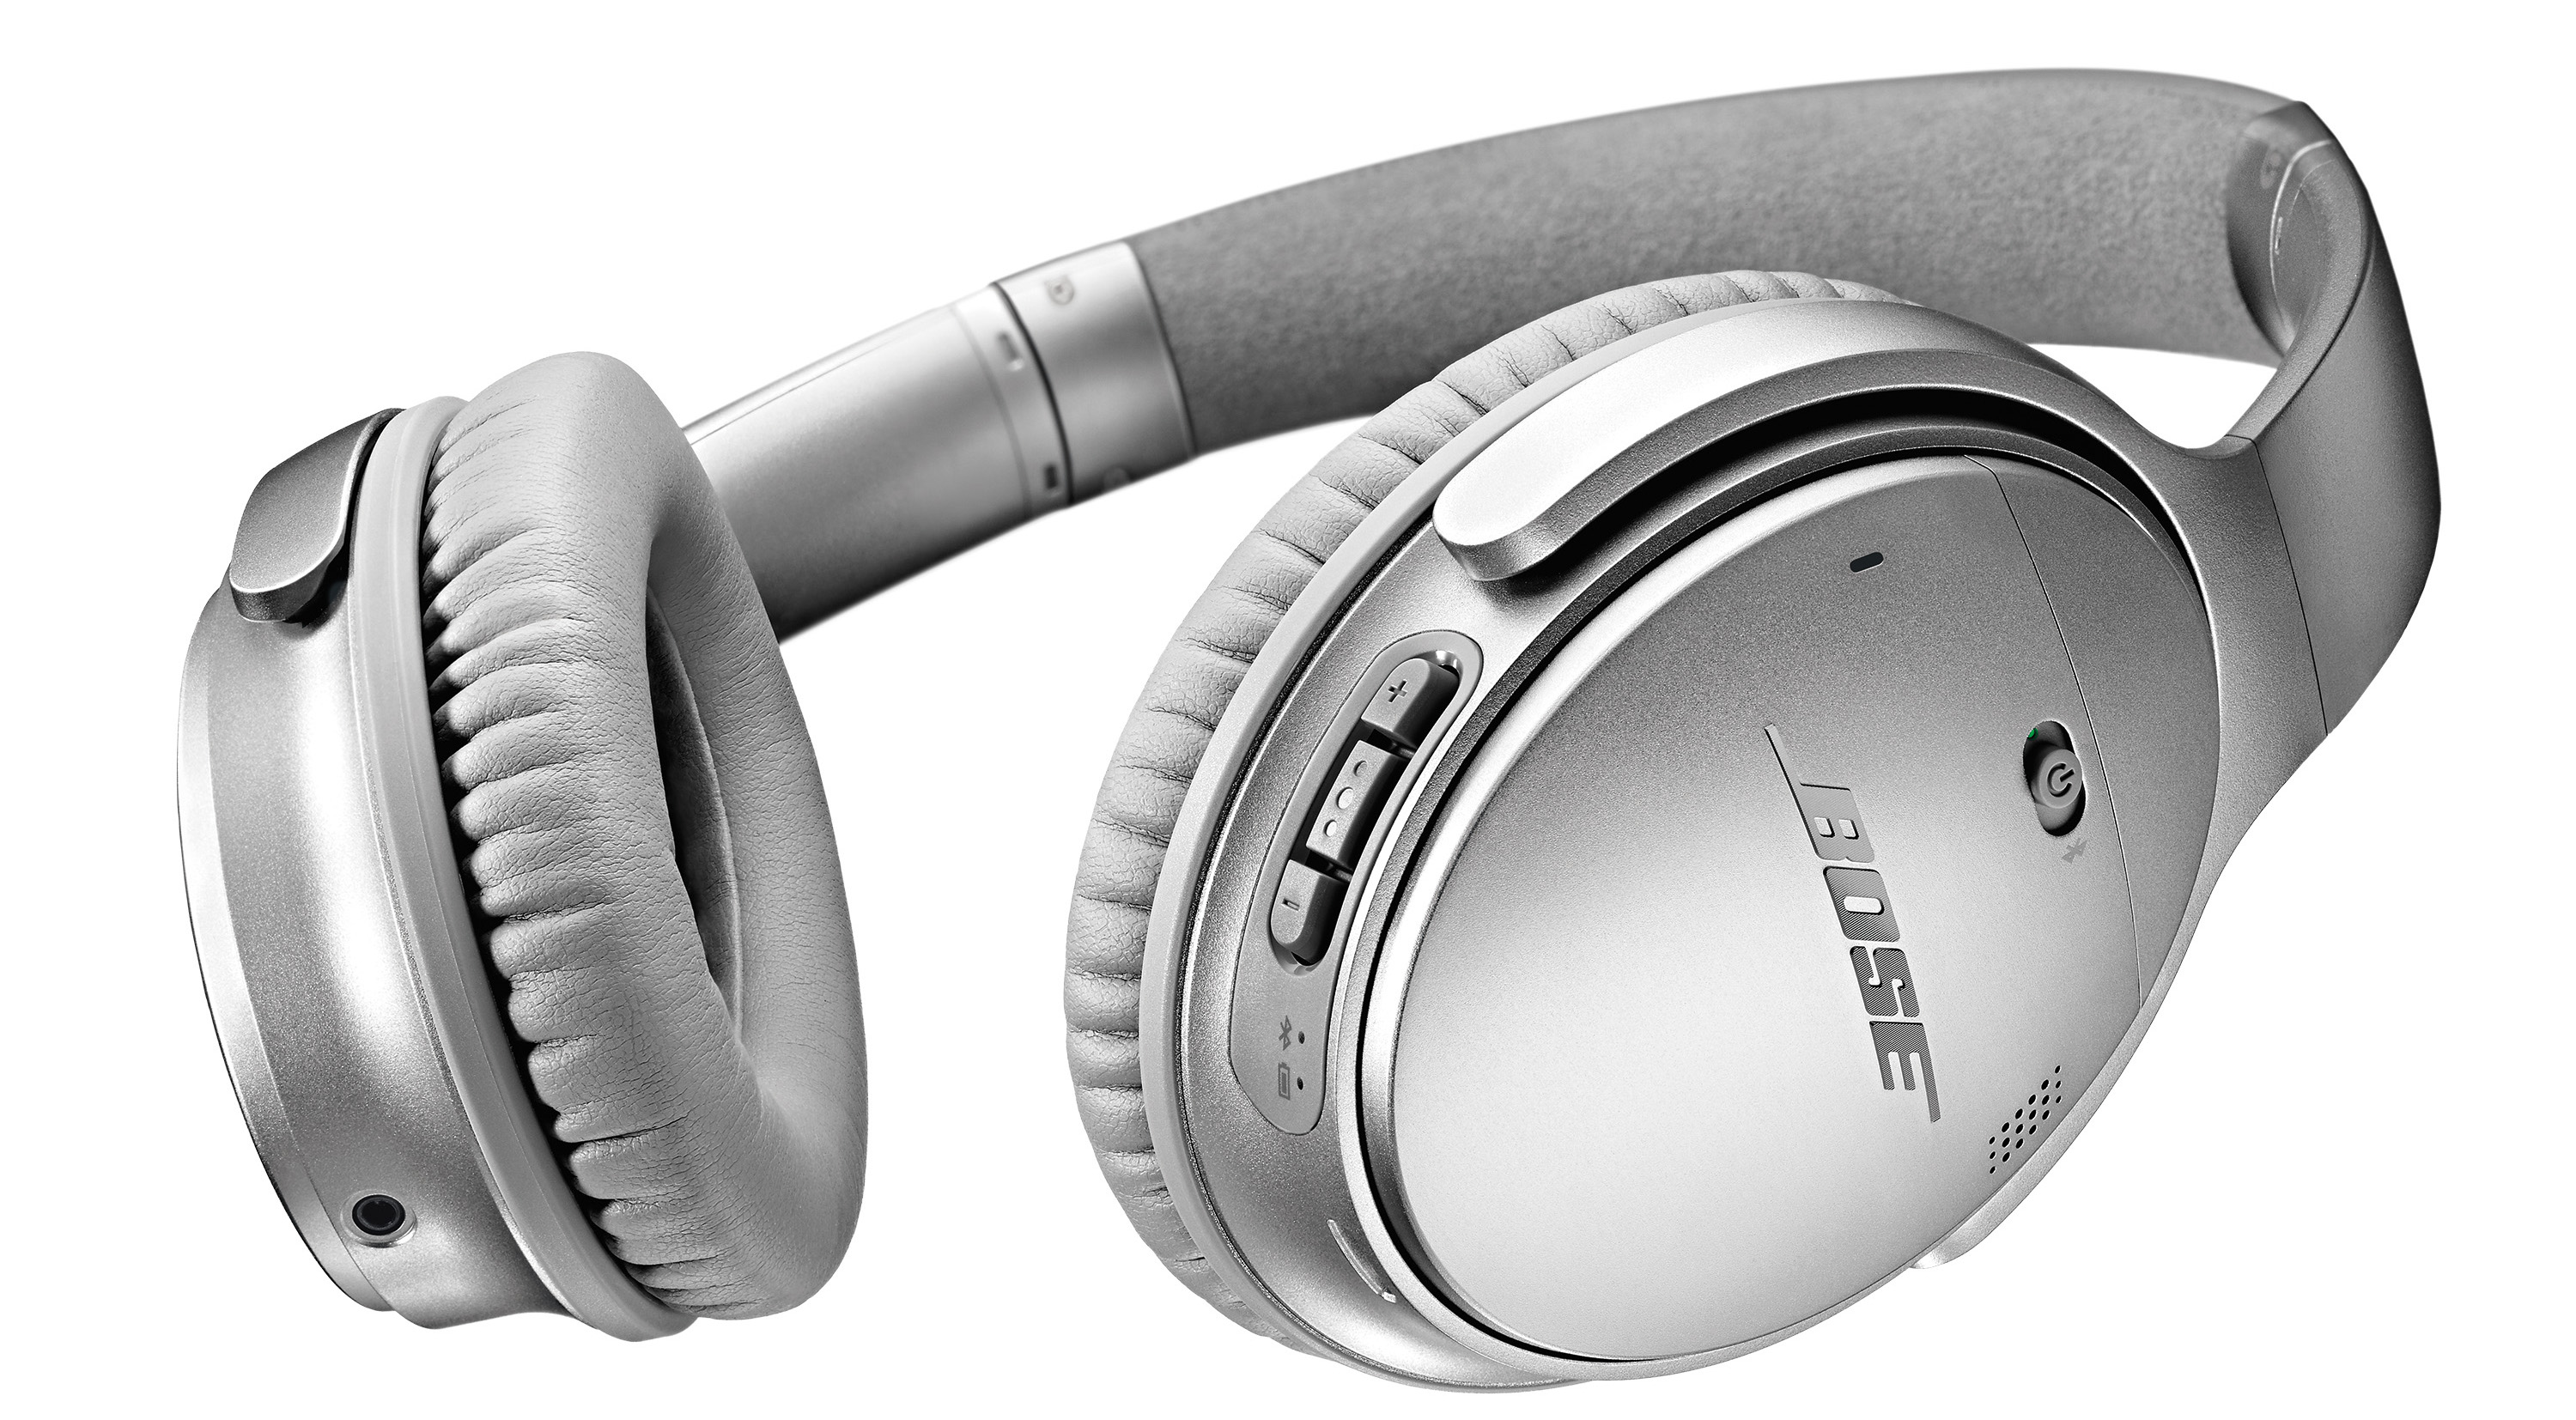 Customer Says Bose Wireless Headphones Are Tracking What You Listen To & Sharing That Info Without Permission